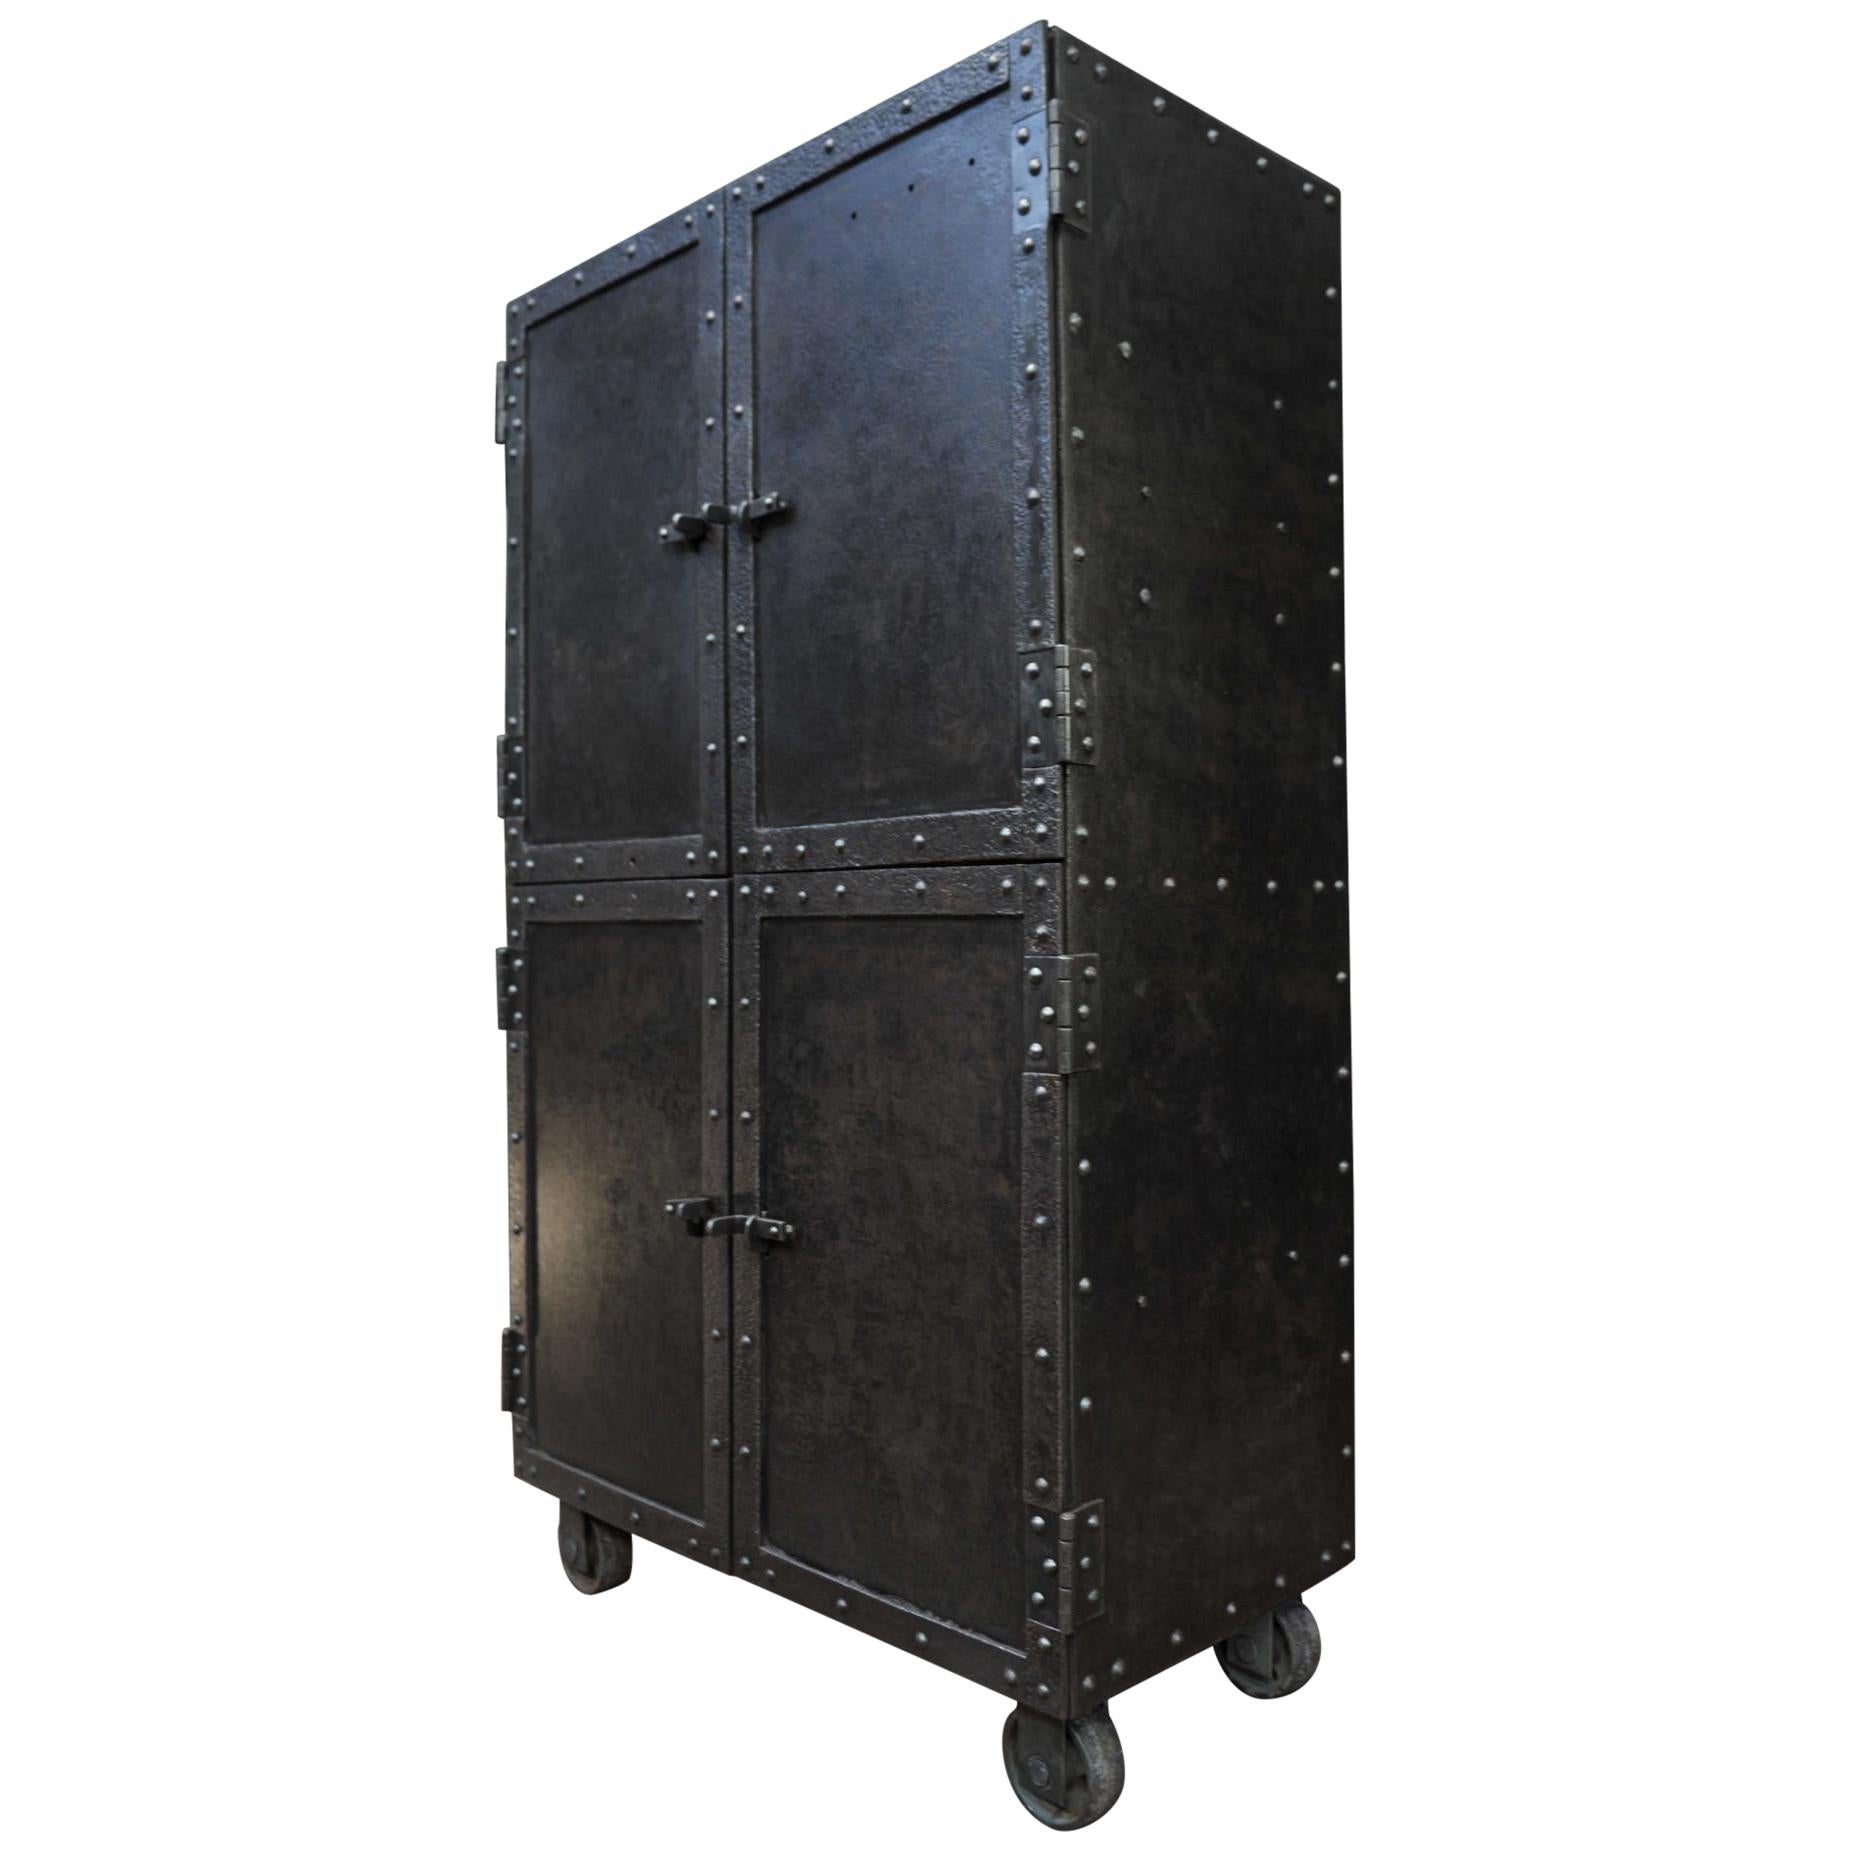 Exceptional Four-Doors Industrial Riveted Iron Cabinet on Wheels, circa 1900